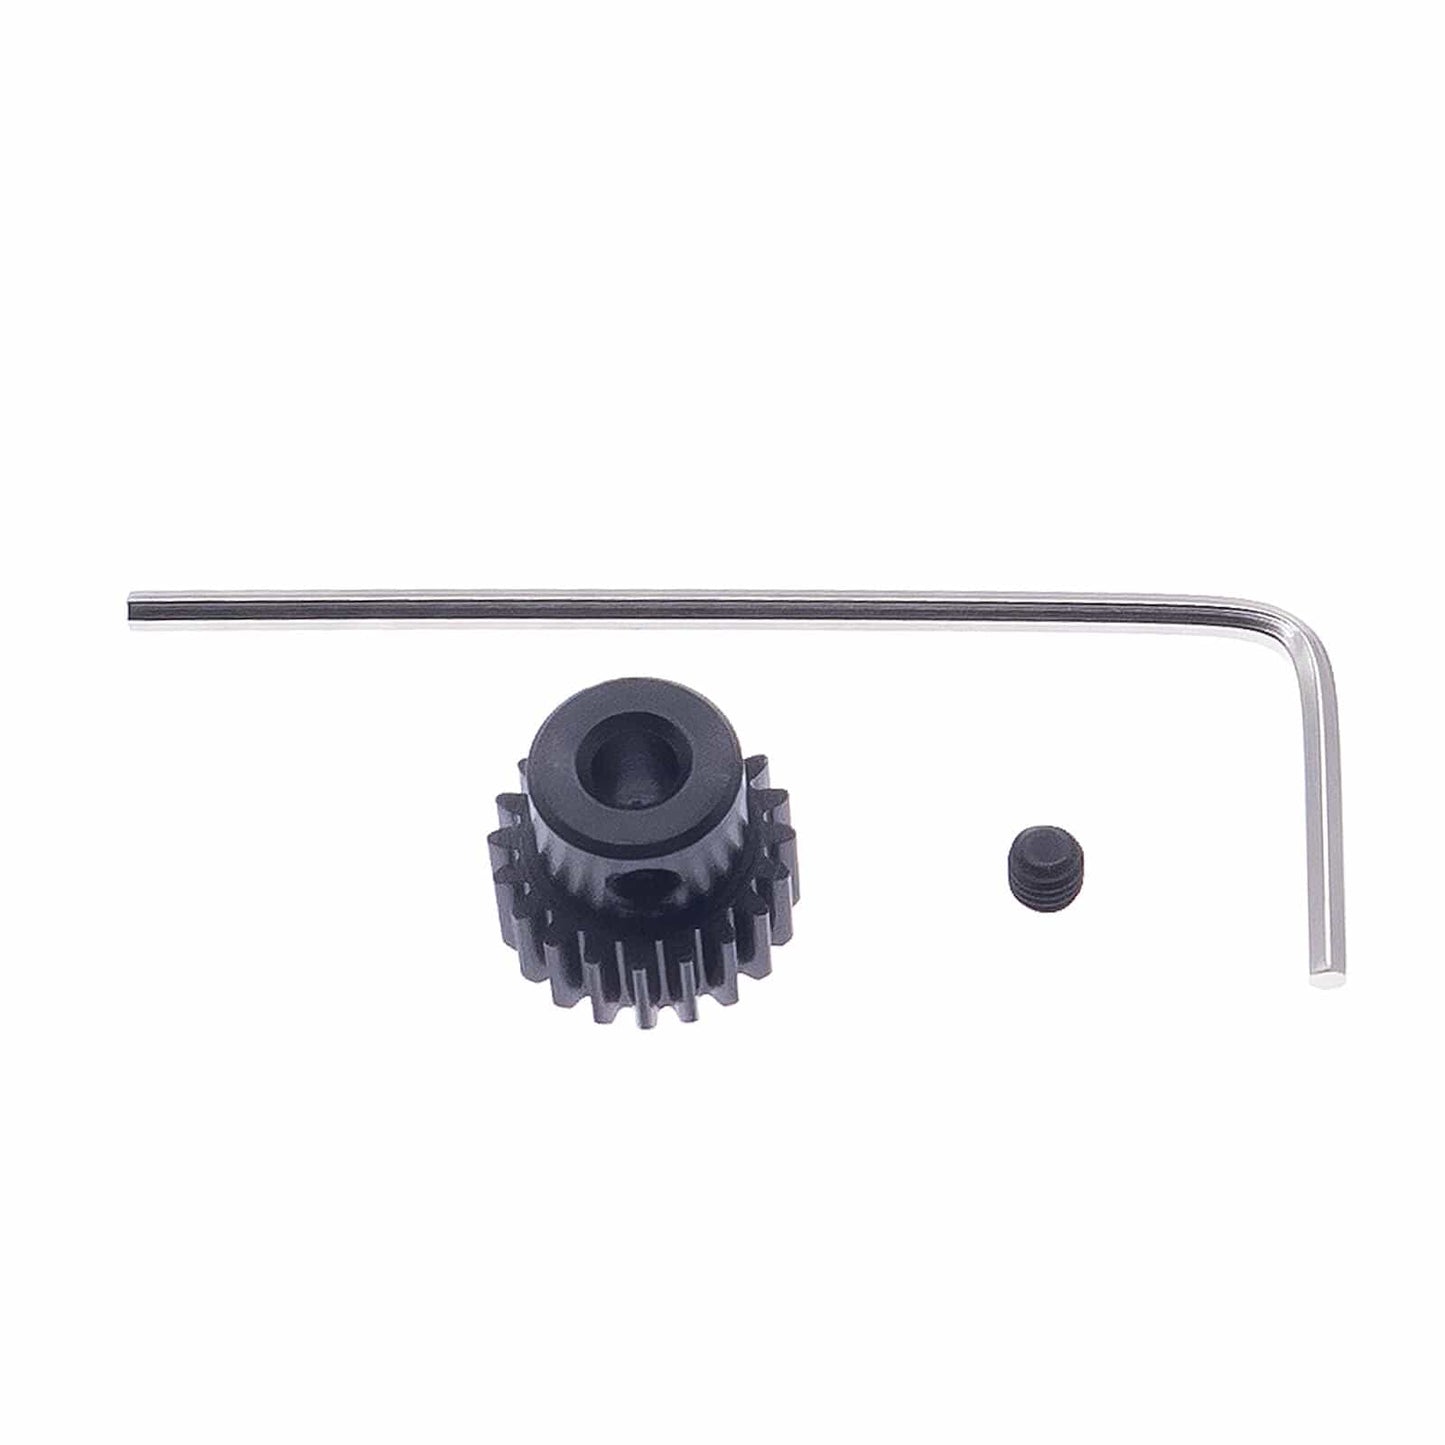 RCAWD REMOTE CONTROL HOBBY RCAWD 48P Pinion Gear Set 20T ECX3018 for ECX 1/10 Series Upgraded Hop-up Parts